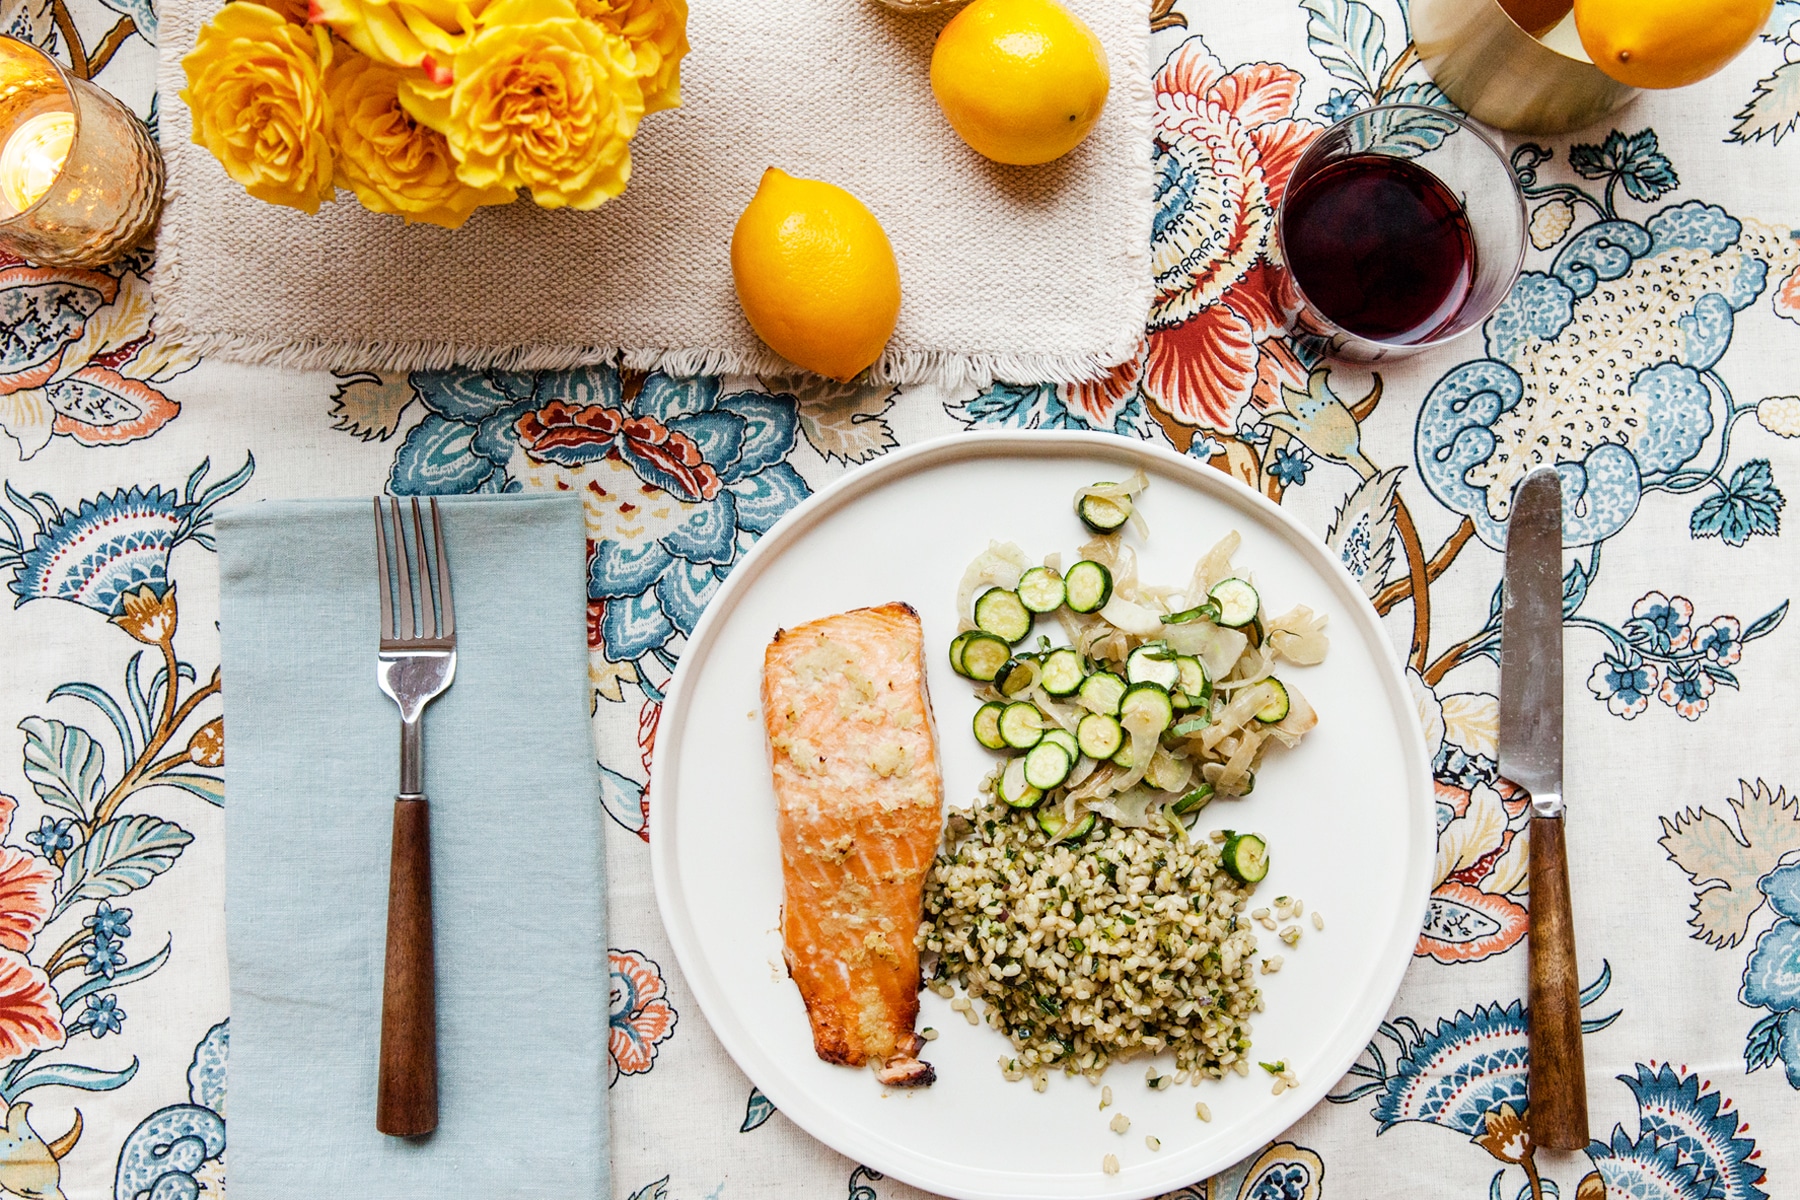 Thai Salmon with Herby Brown Rice and sauteed zucchini on a plate on a flowered tablecloth.